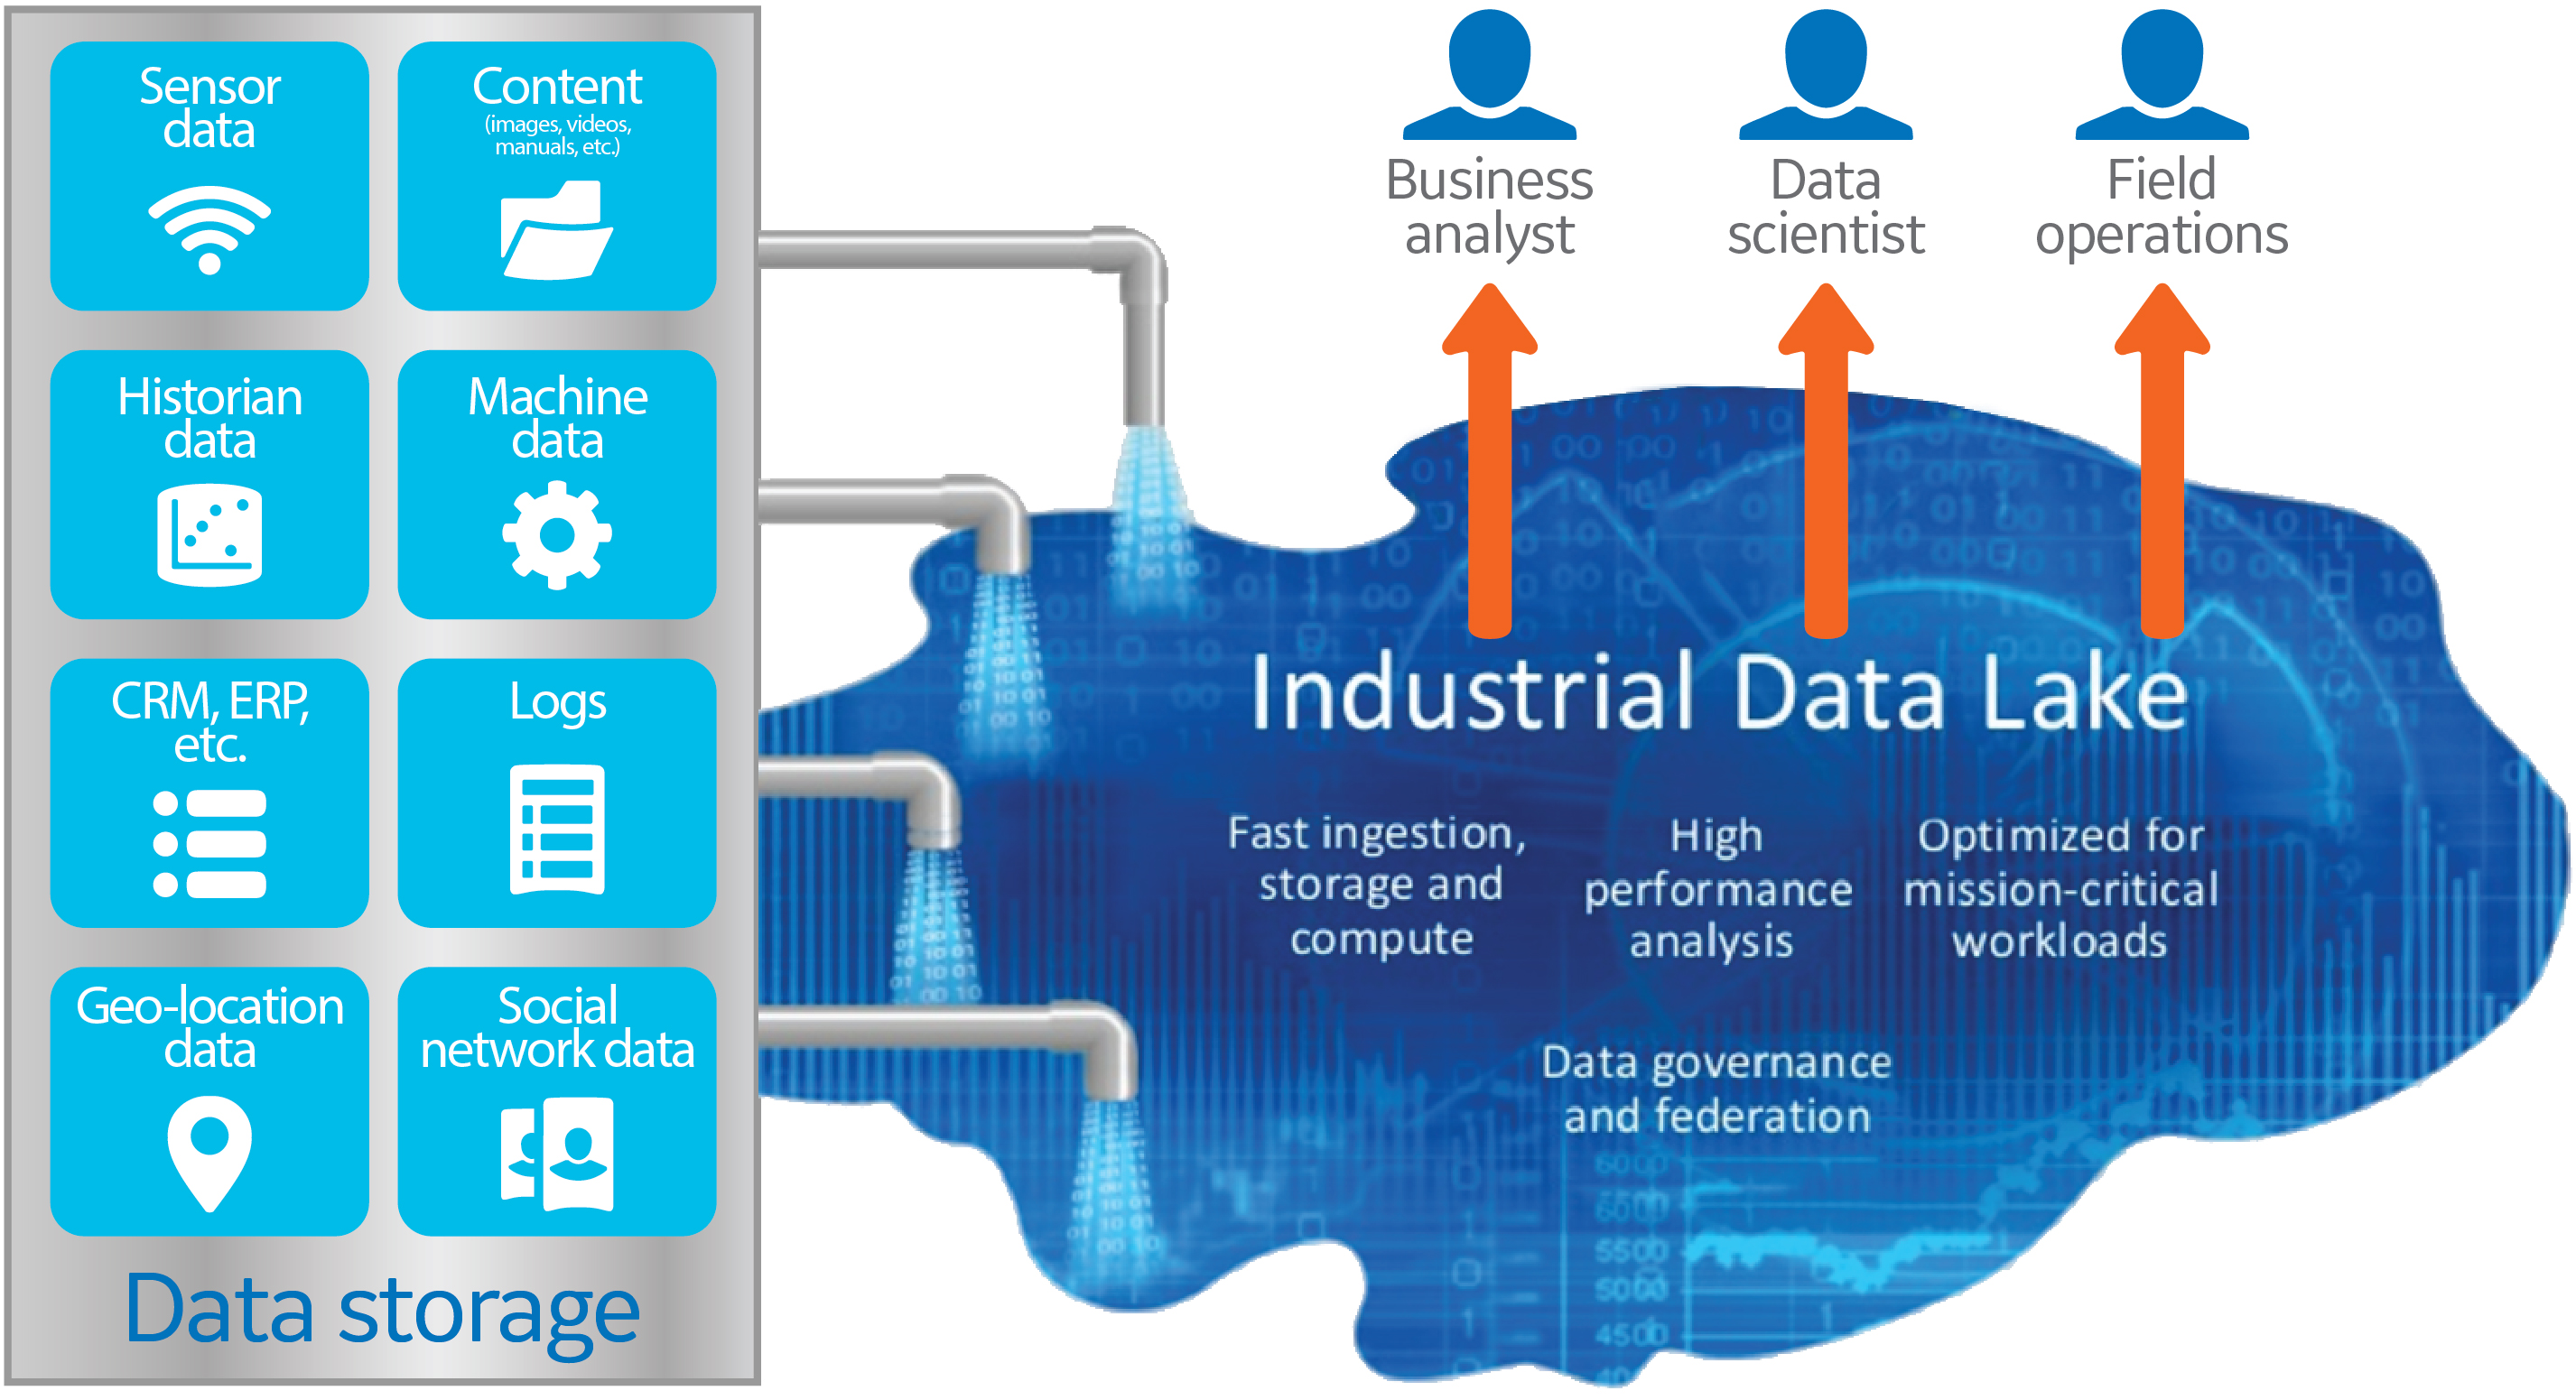 Digital manufacturing schematic, showing data inputs, industrial data lake, and outputs to stakeholders